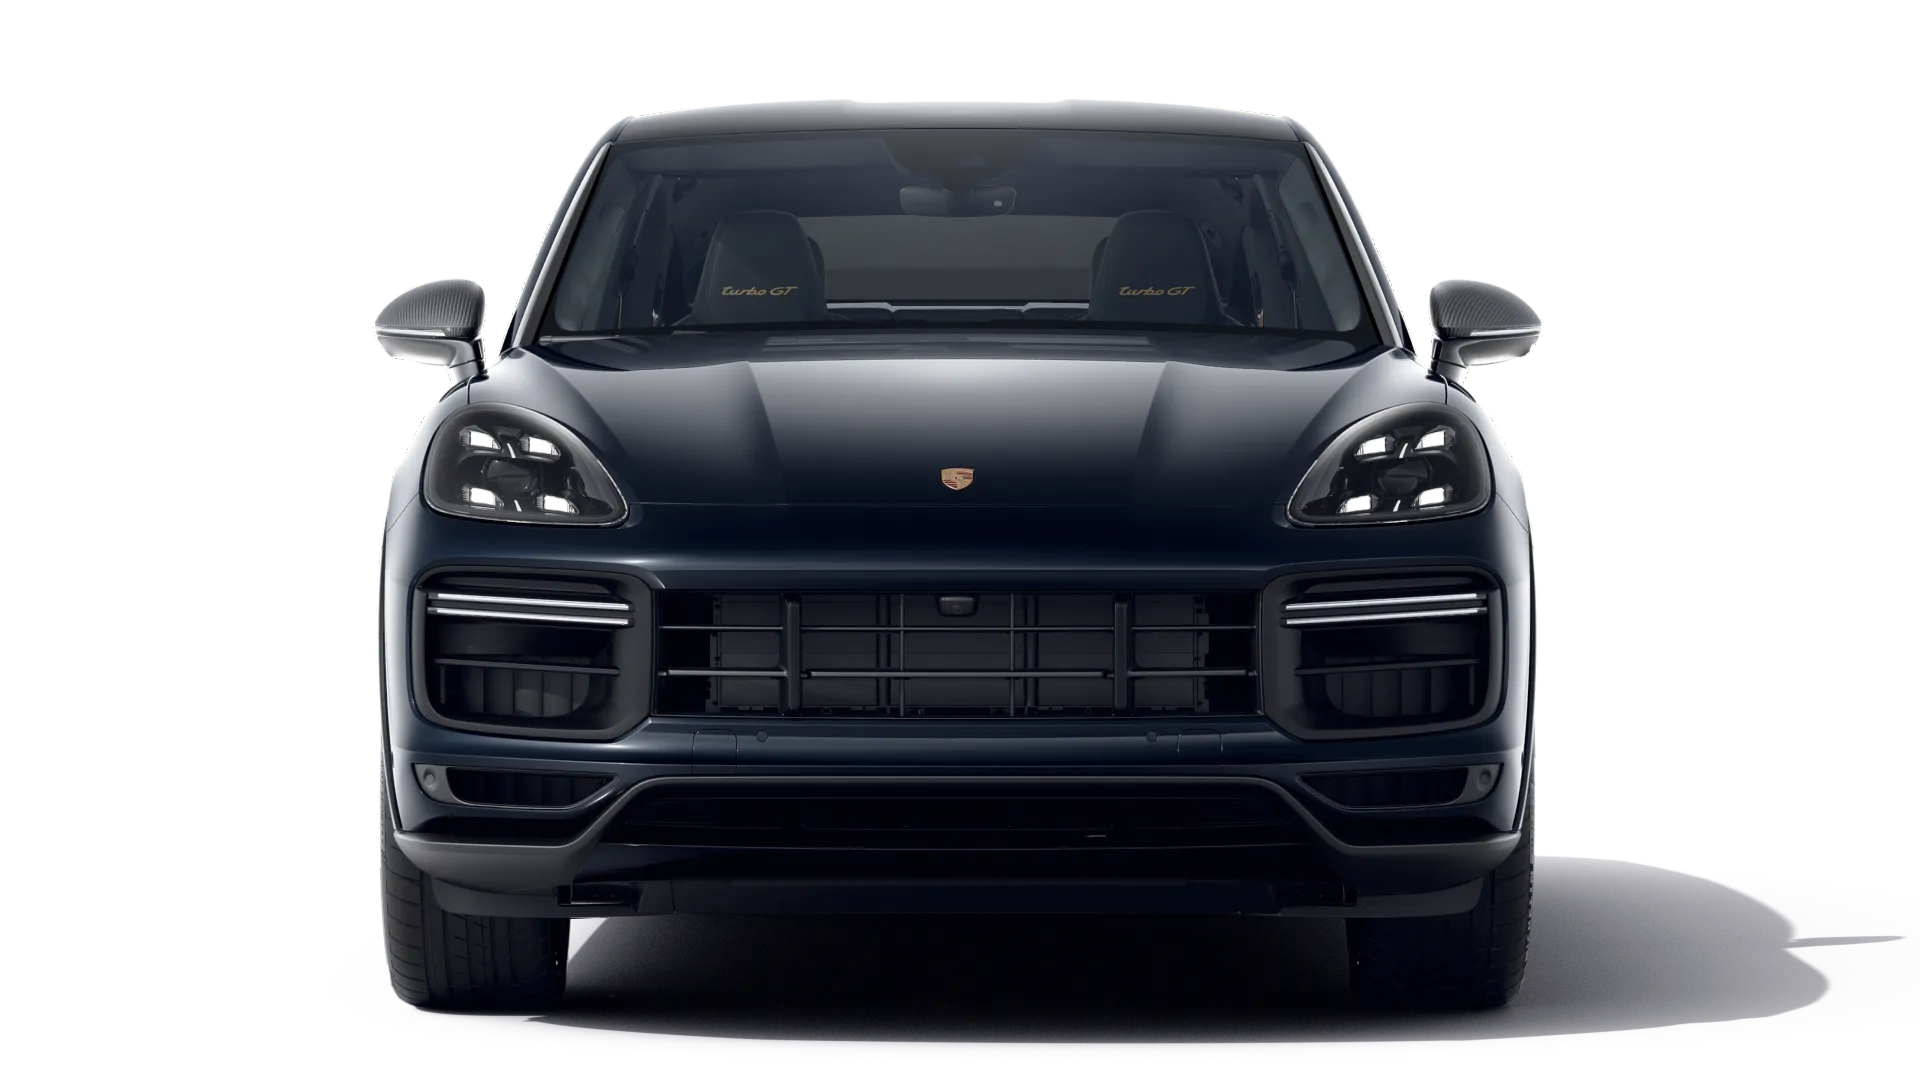 Exterior view of Cayenne Turbo GT